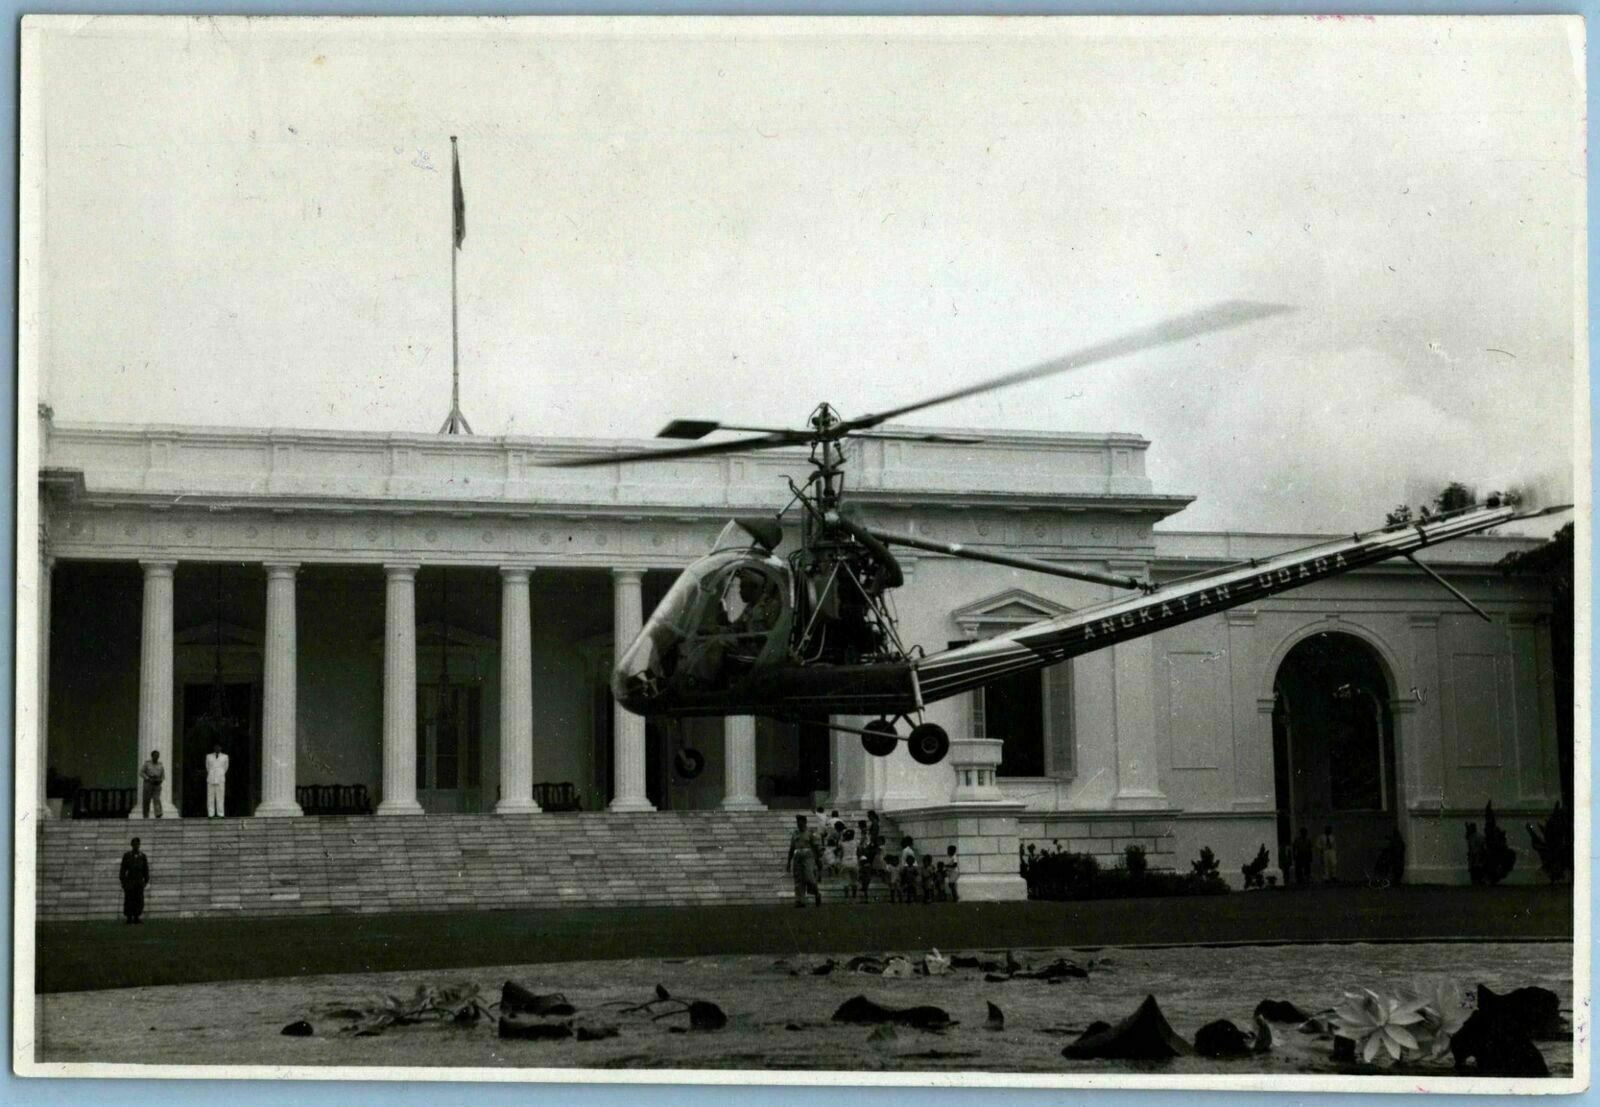 HILLER 360 HELICOPTER INDONESIAN AIR FORCE PRESIDENTS PALACE JAKARTA OLD PHOTO